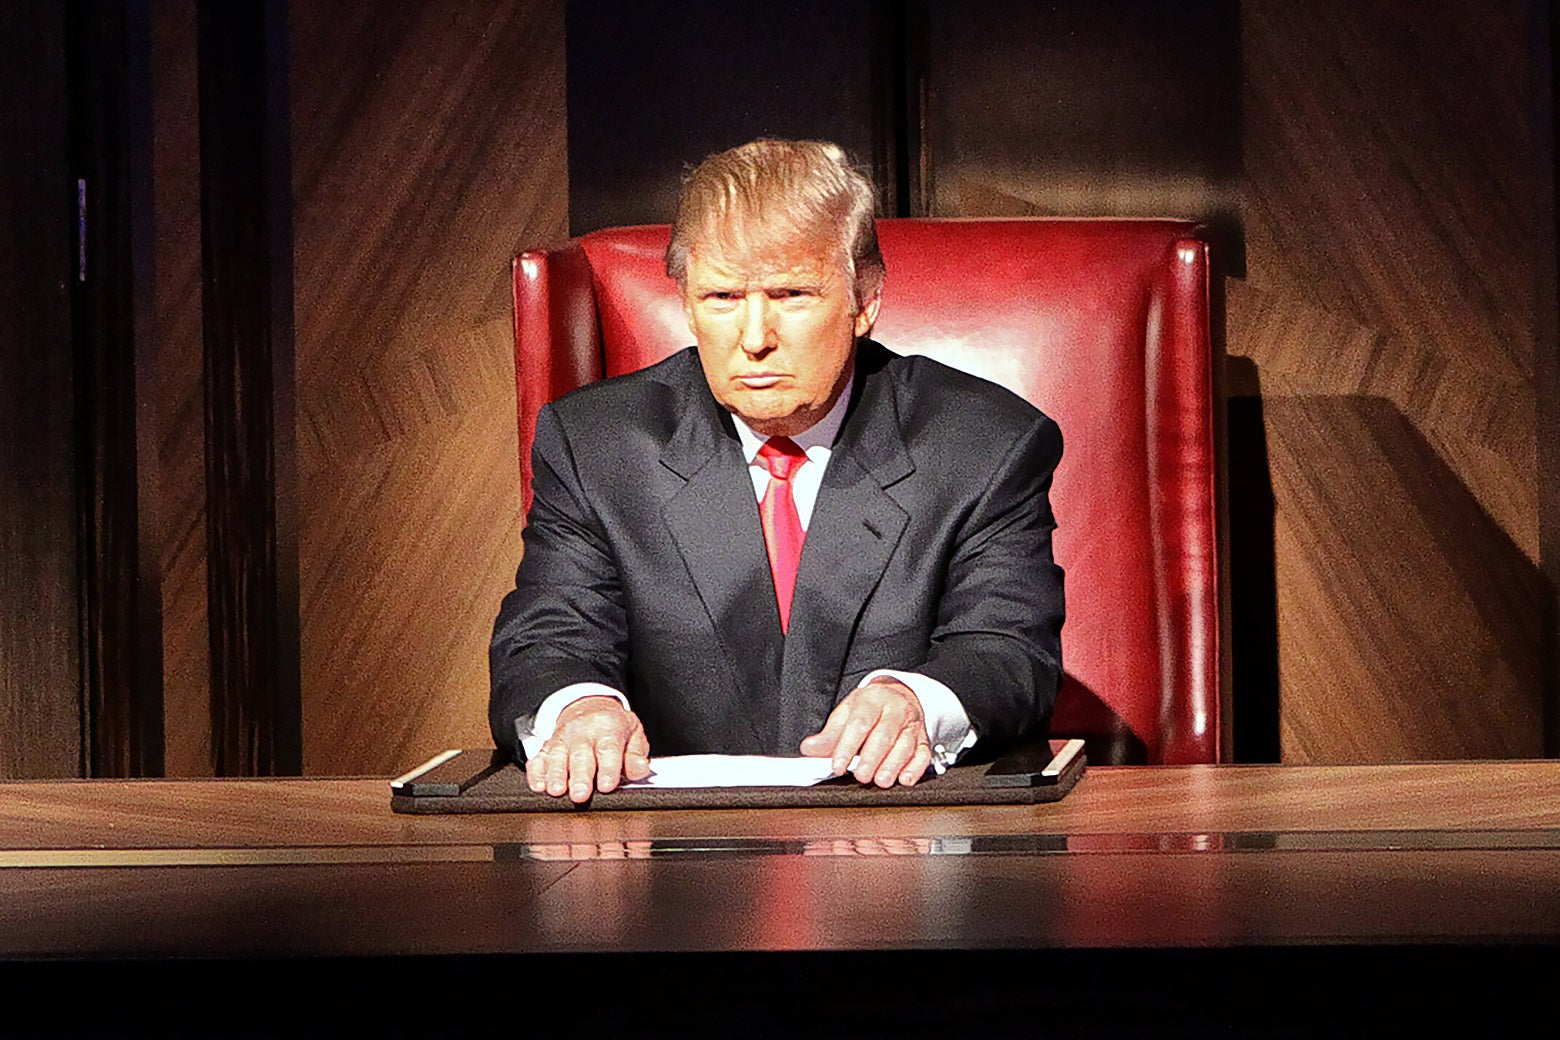 Trump sits in a red boardroom chair looking very serious and squinting as if thinking very hard.